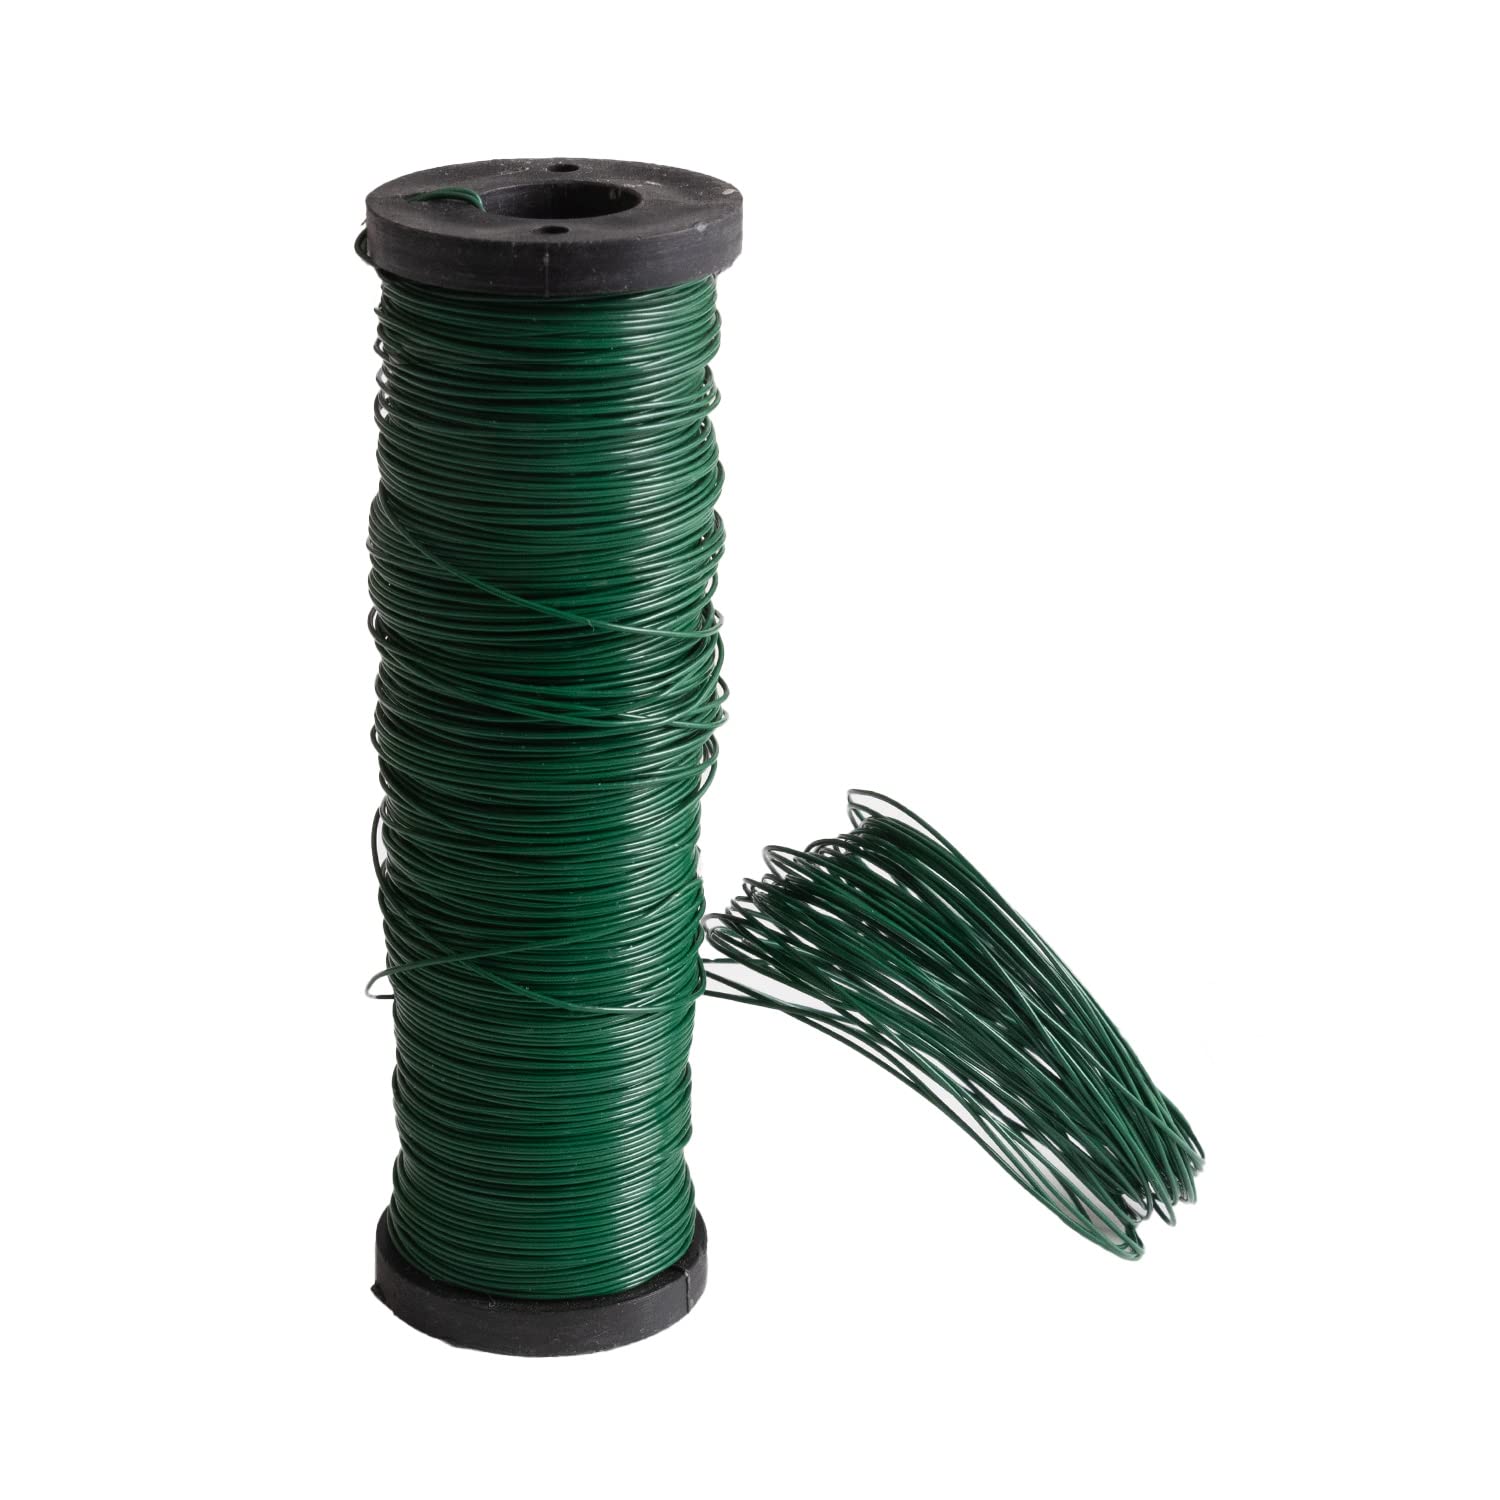 Royal Imports Bulk Green Paddle Wire Spool 150 YD roll 24 Gauge